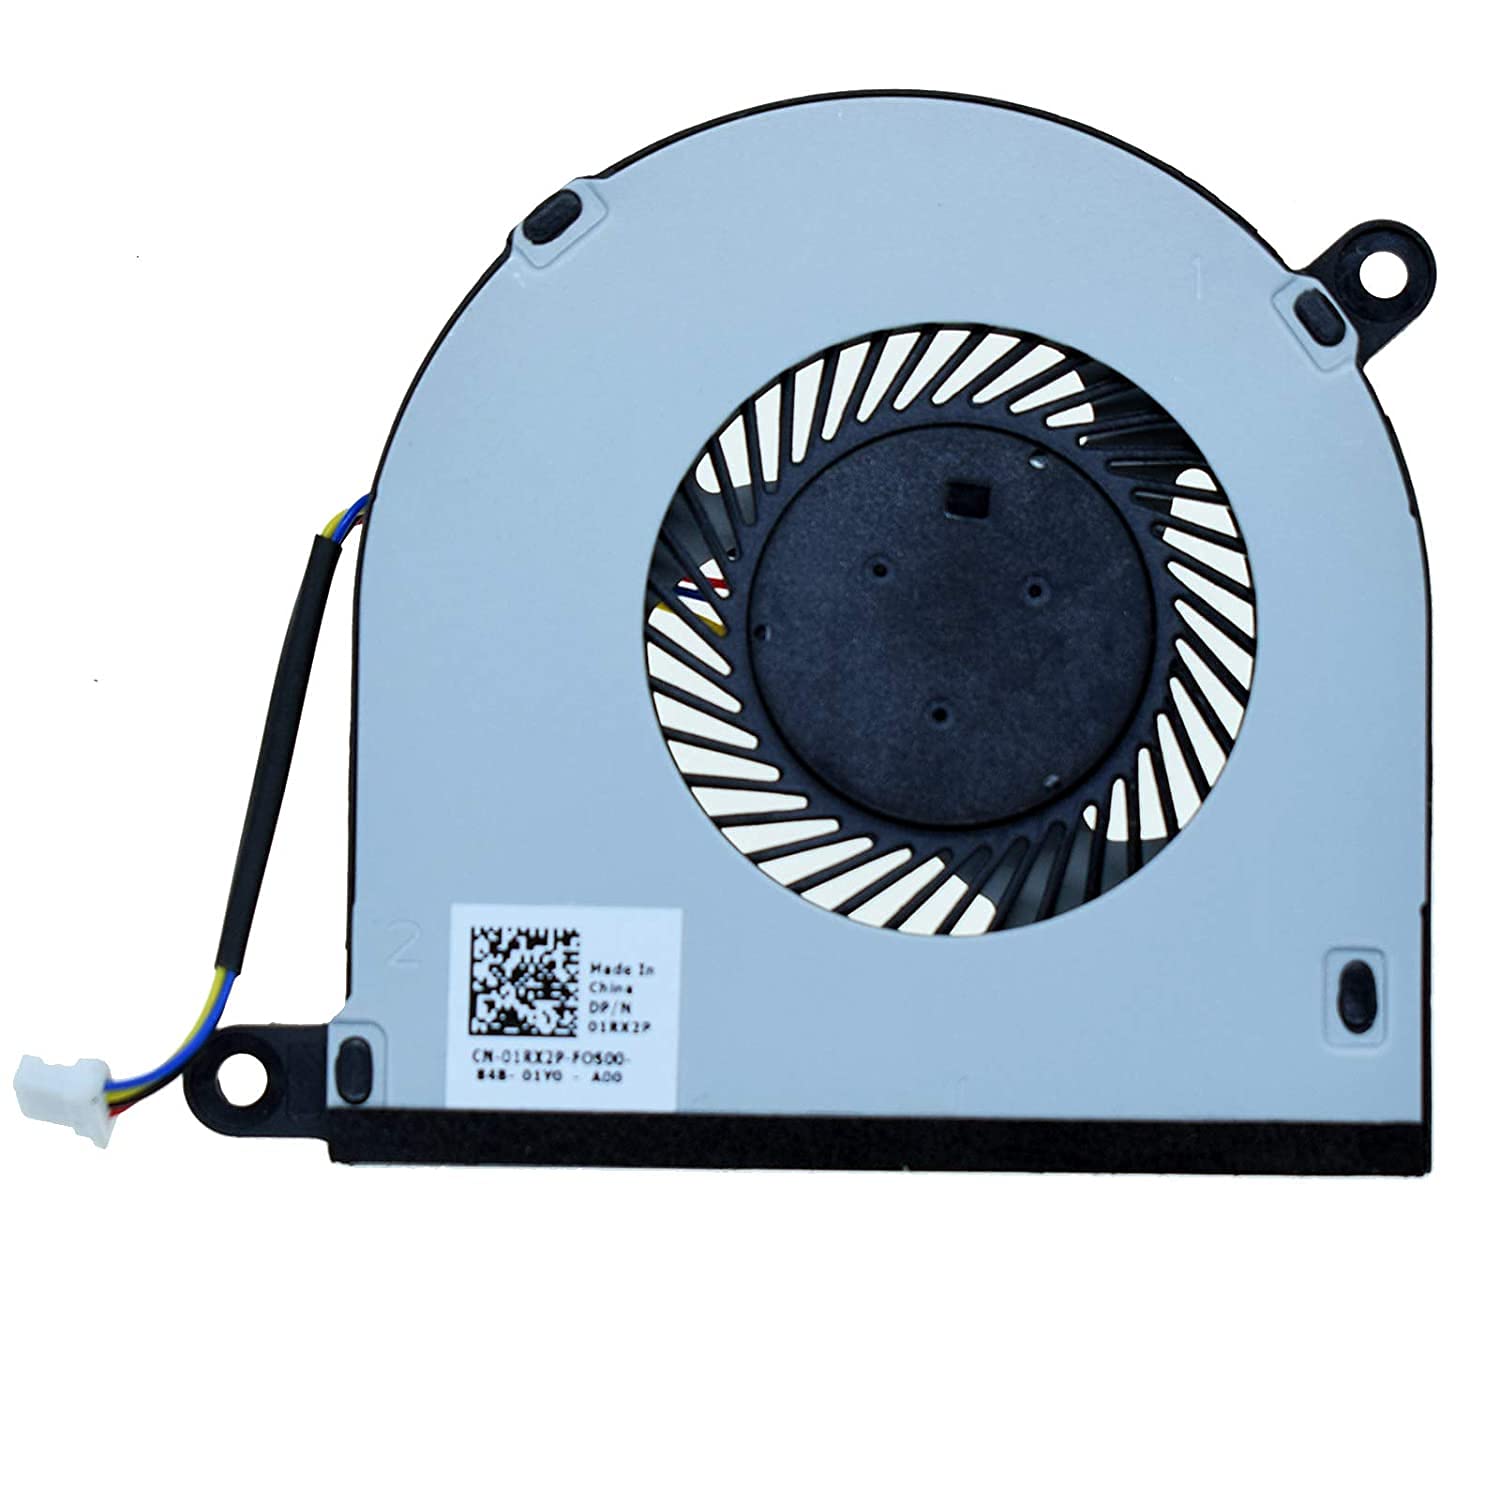 Rangale CPU Cooling Fan for Dell Inspiron 13 5368 5378 5379 7368 7375 7378 Inspiron 15 7579 7569 5568 5578 5579 Latitude 3390 3379 2 in 1 Series Laptop CN-031TPT